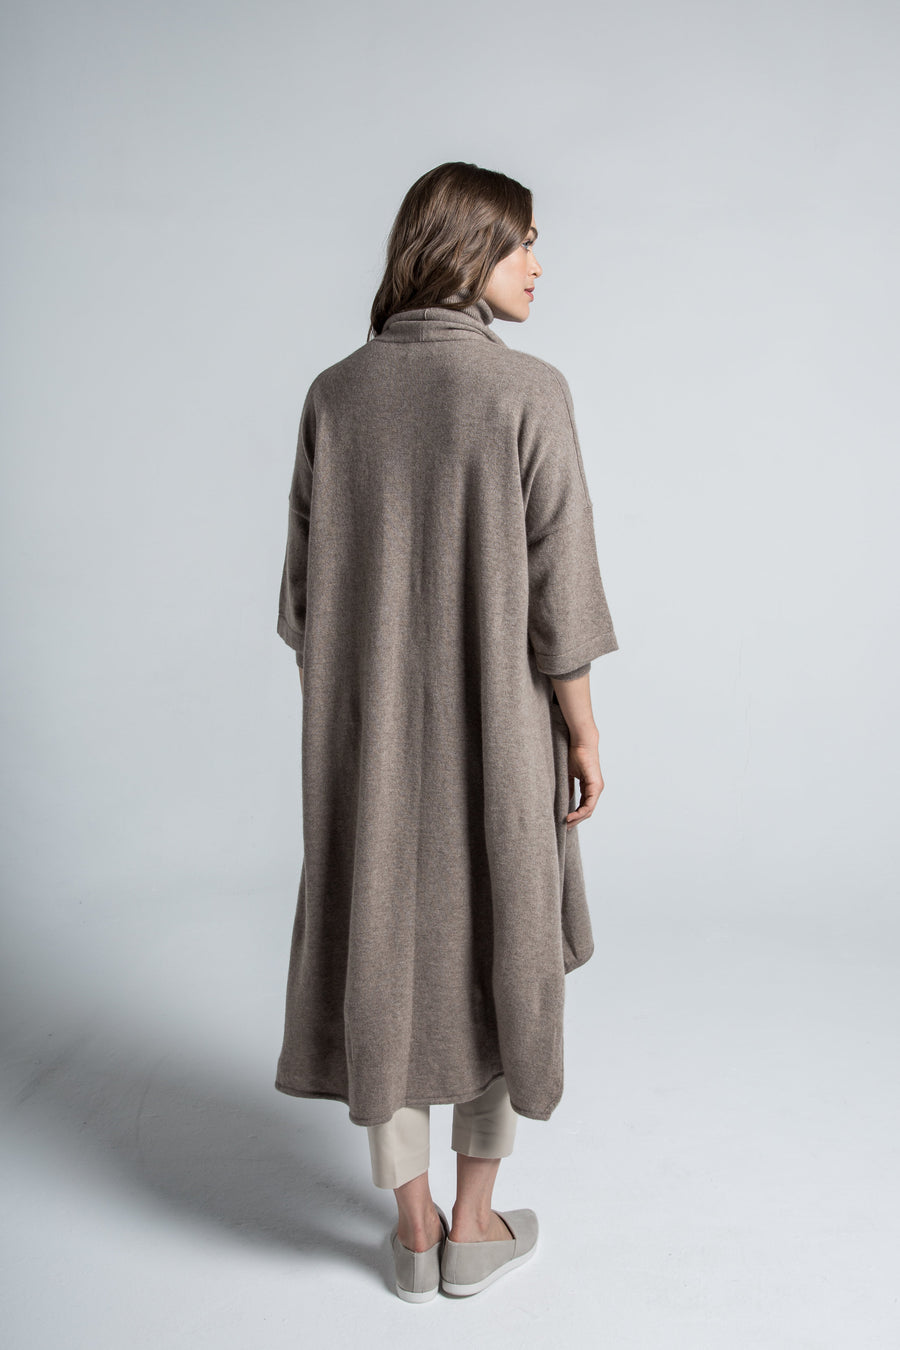 pine cashmere celine women's loose fit 100% pure organic cashmere cardigan coat in brown